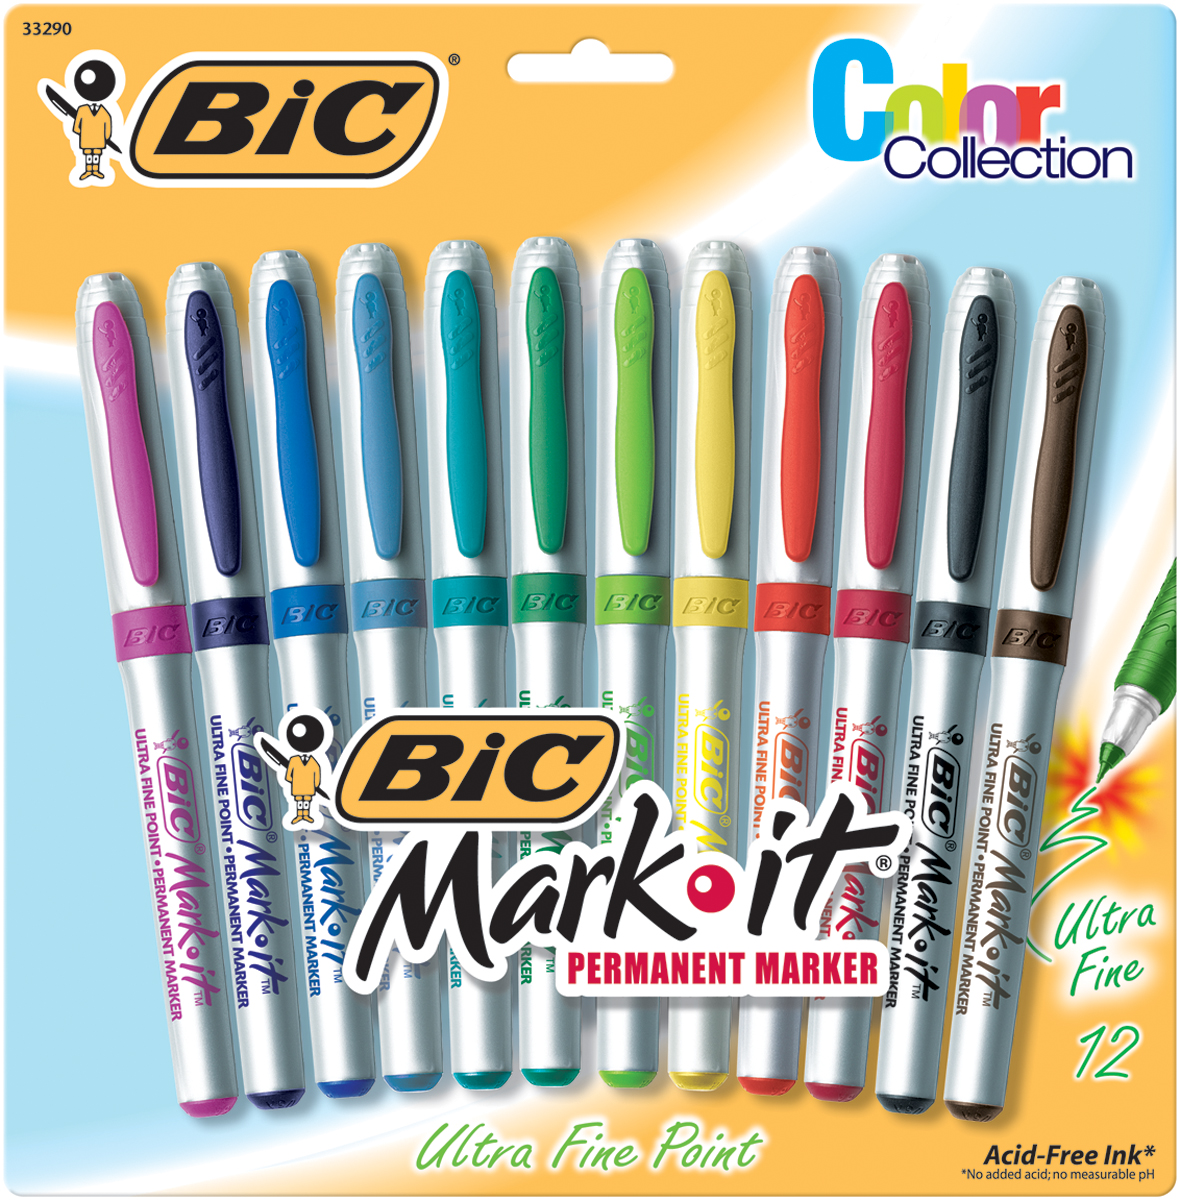 BIC Intensity Fashion Permanent Marker, Fine Point, Assorted